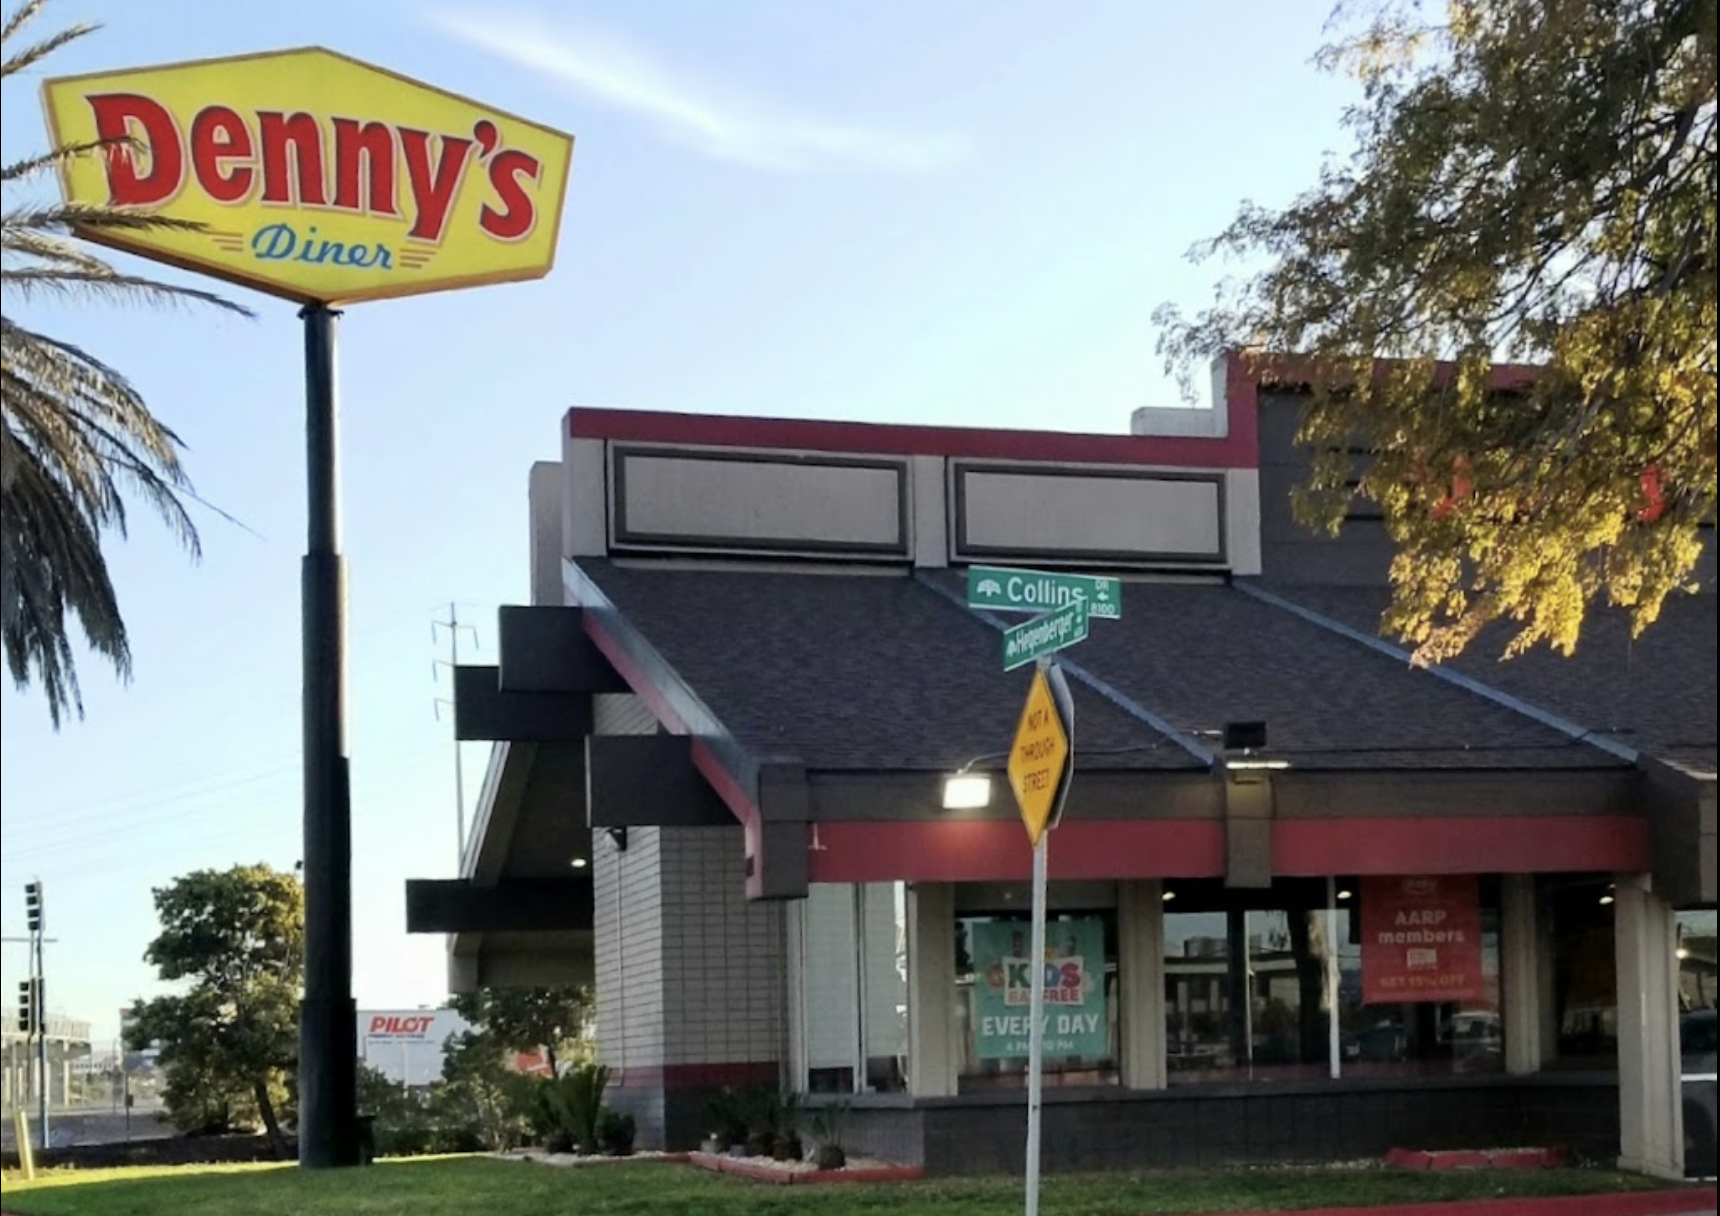 An exterior of a Denny's by day.